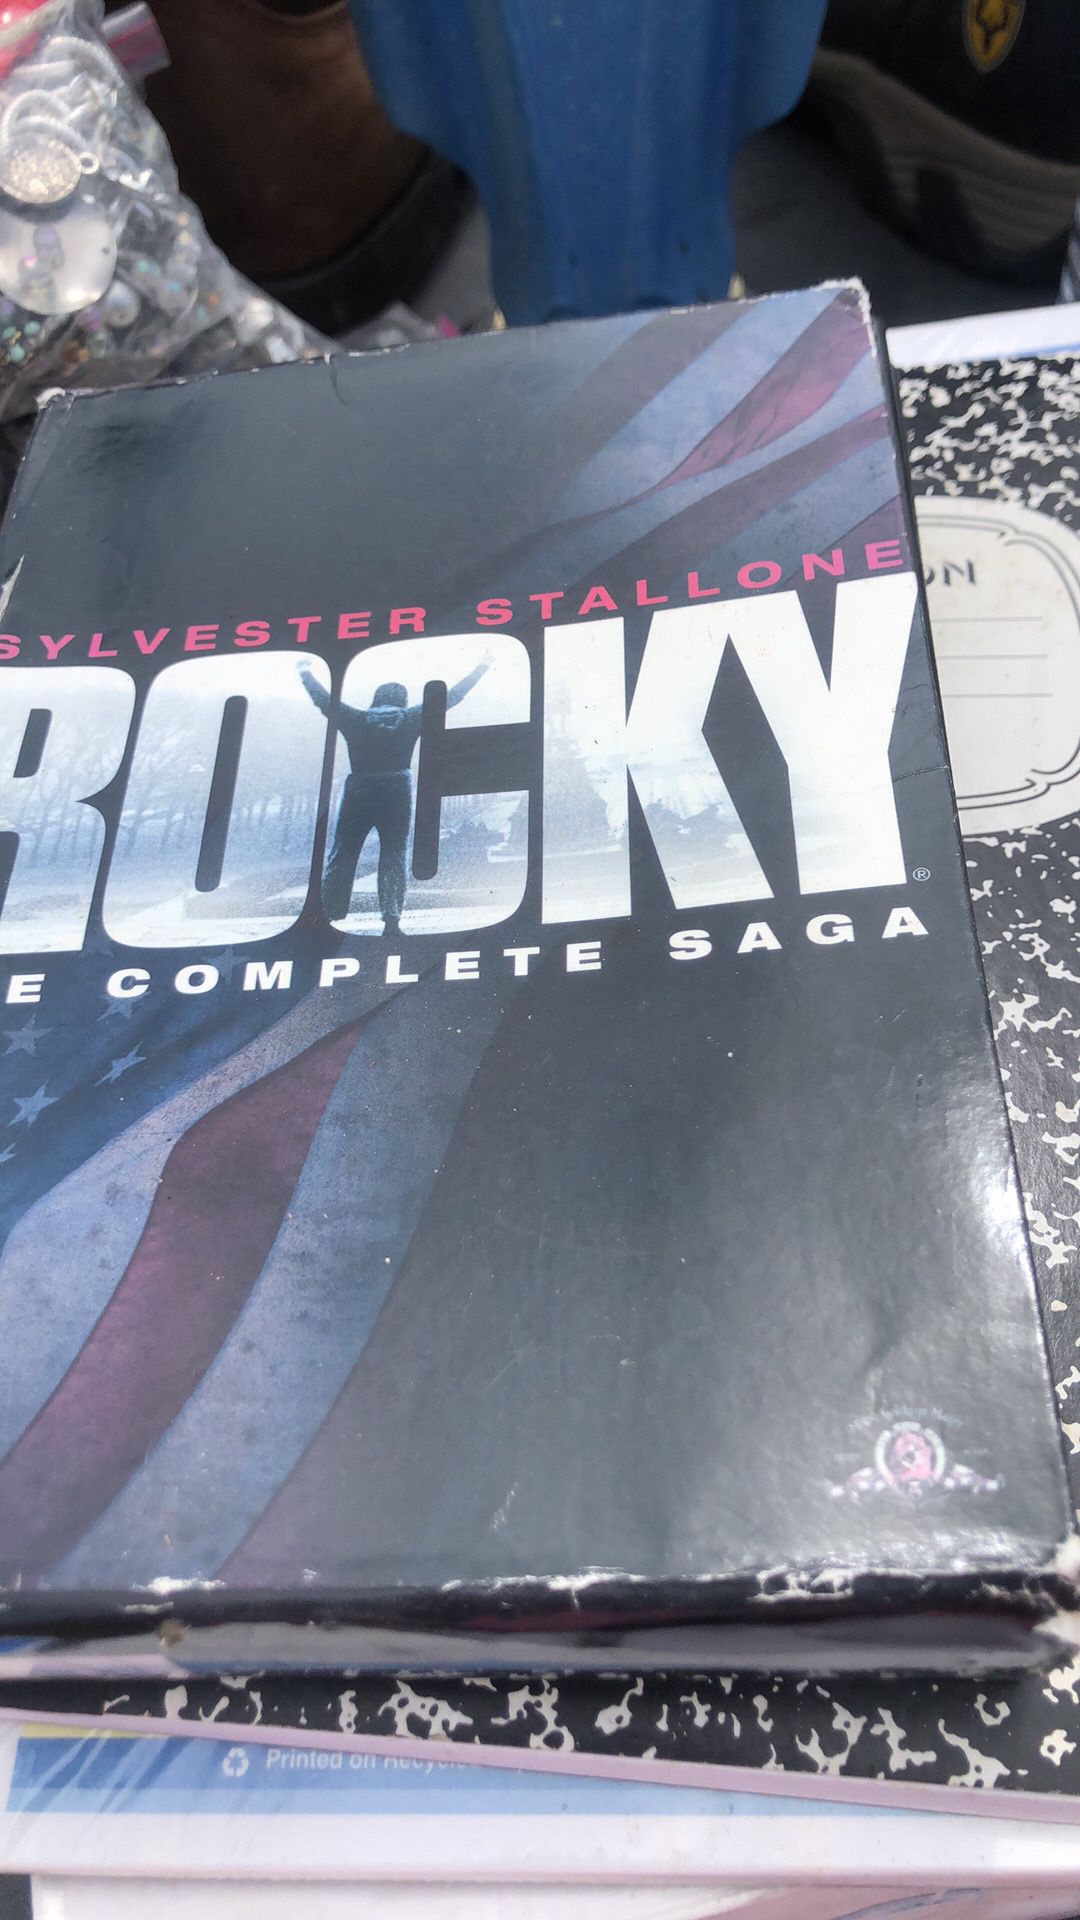 Rocky Movie Collection 